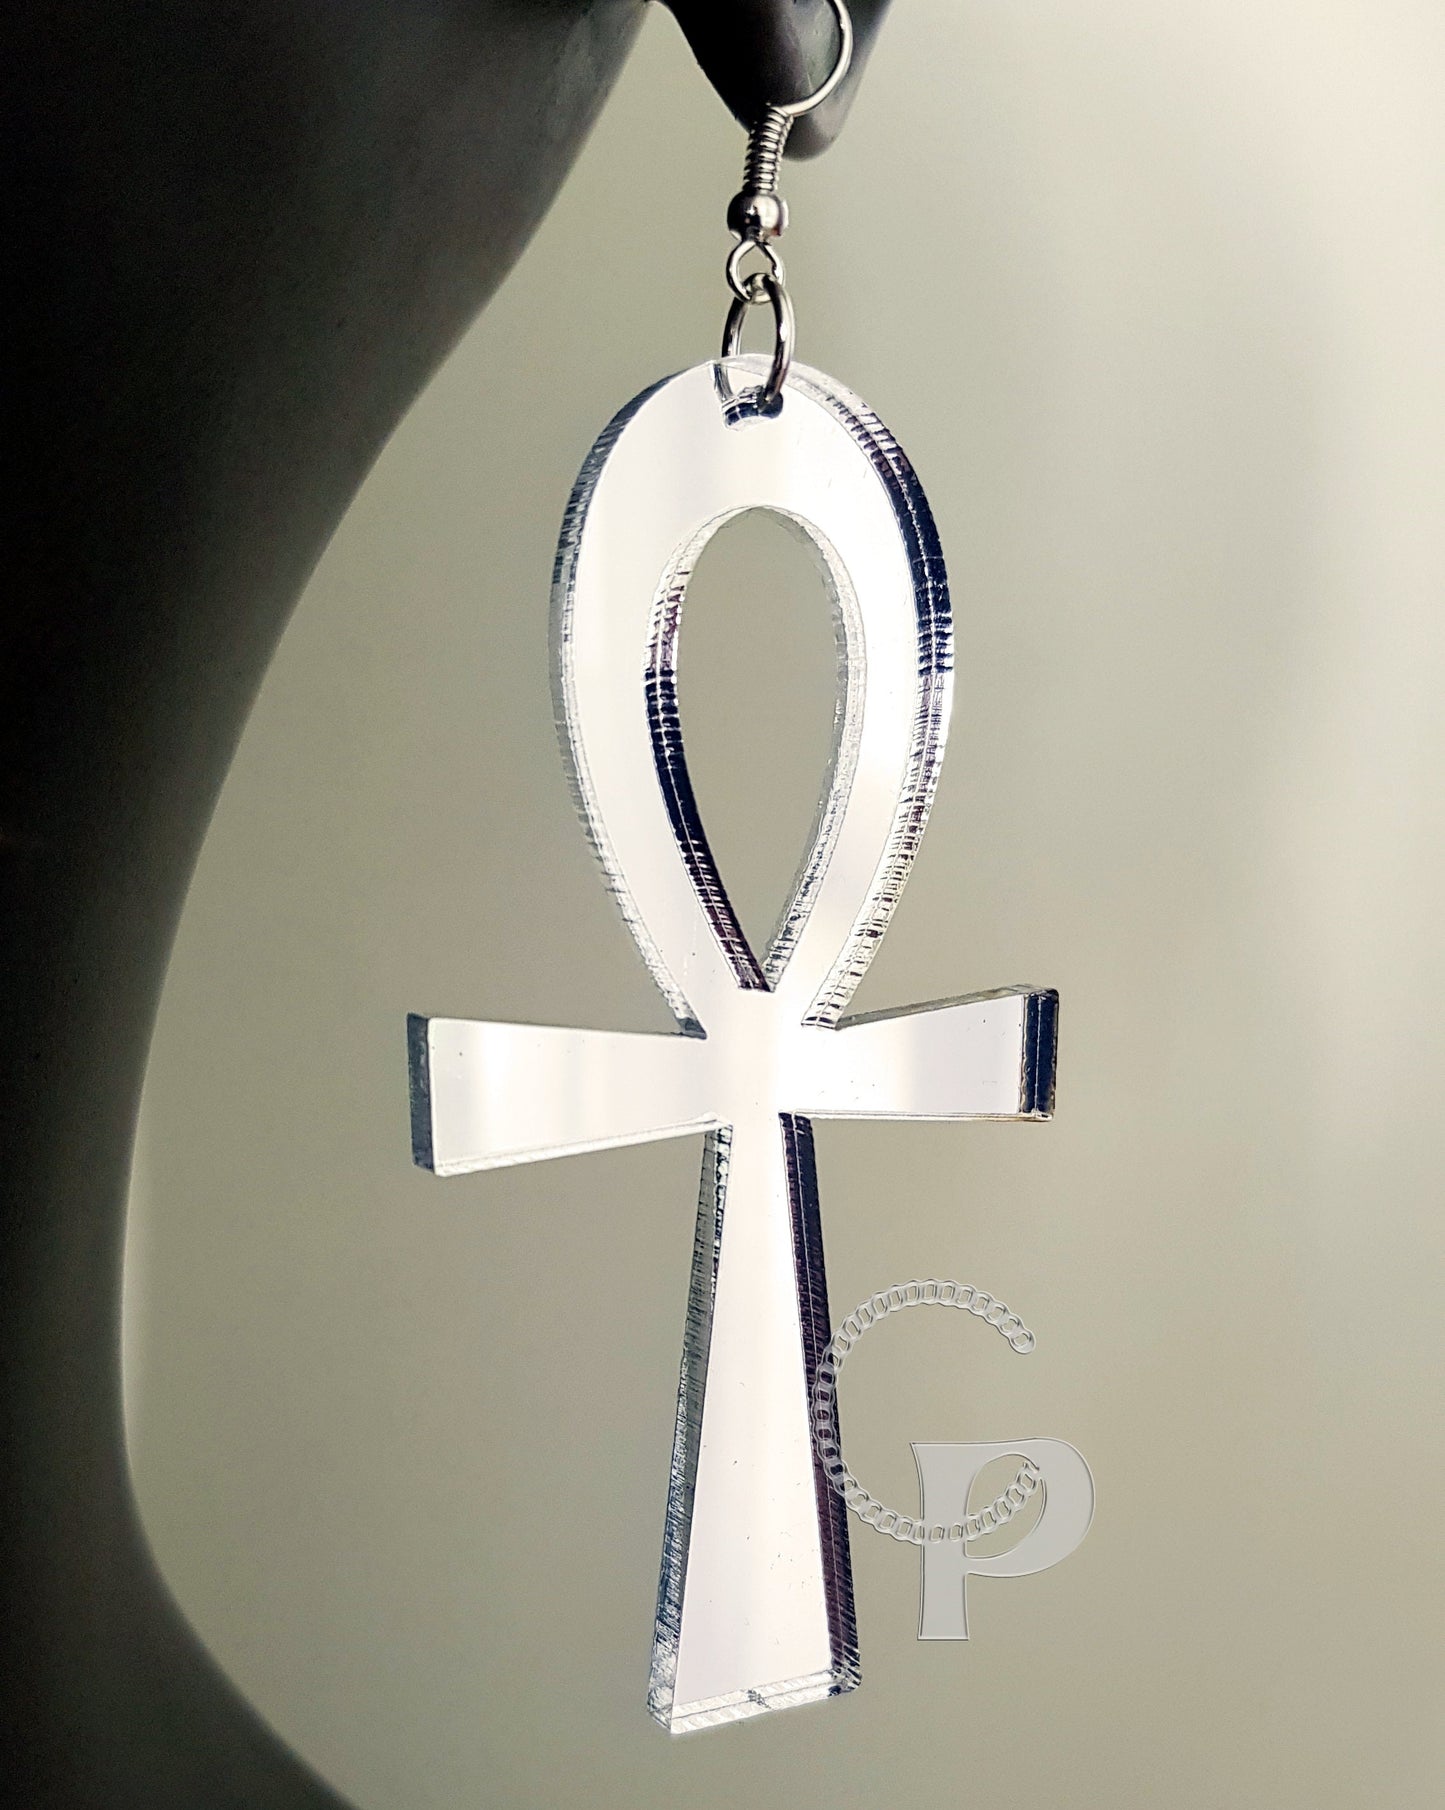 Ankh earrings in silver or gold mirror acrylic Africa Symbol Egyptian Cross